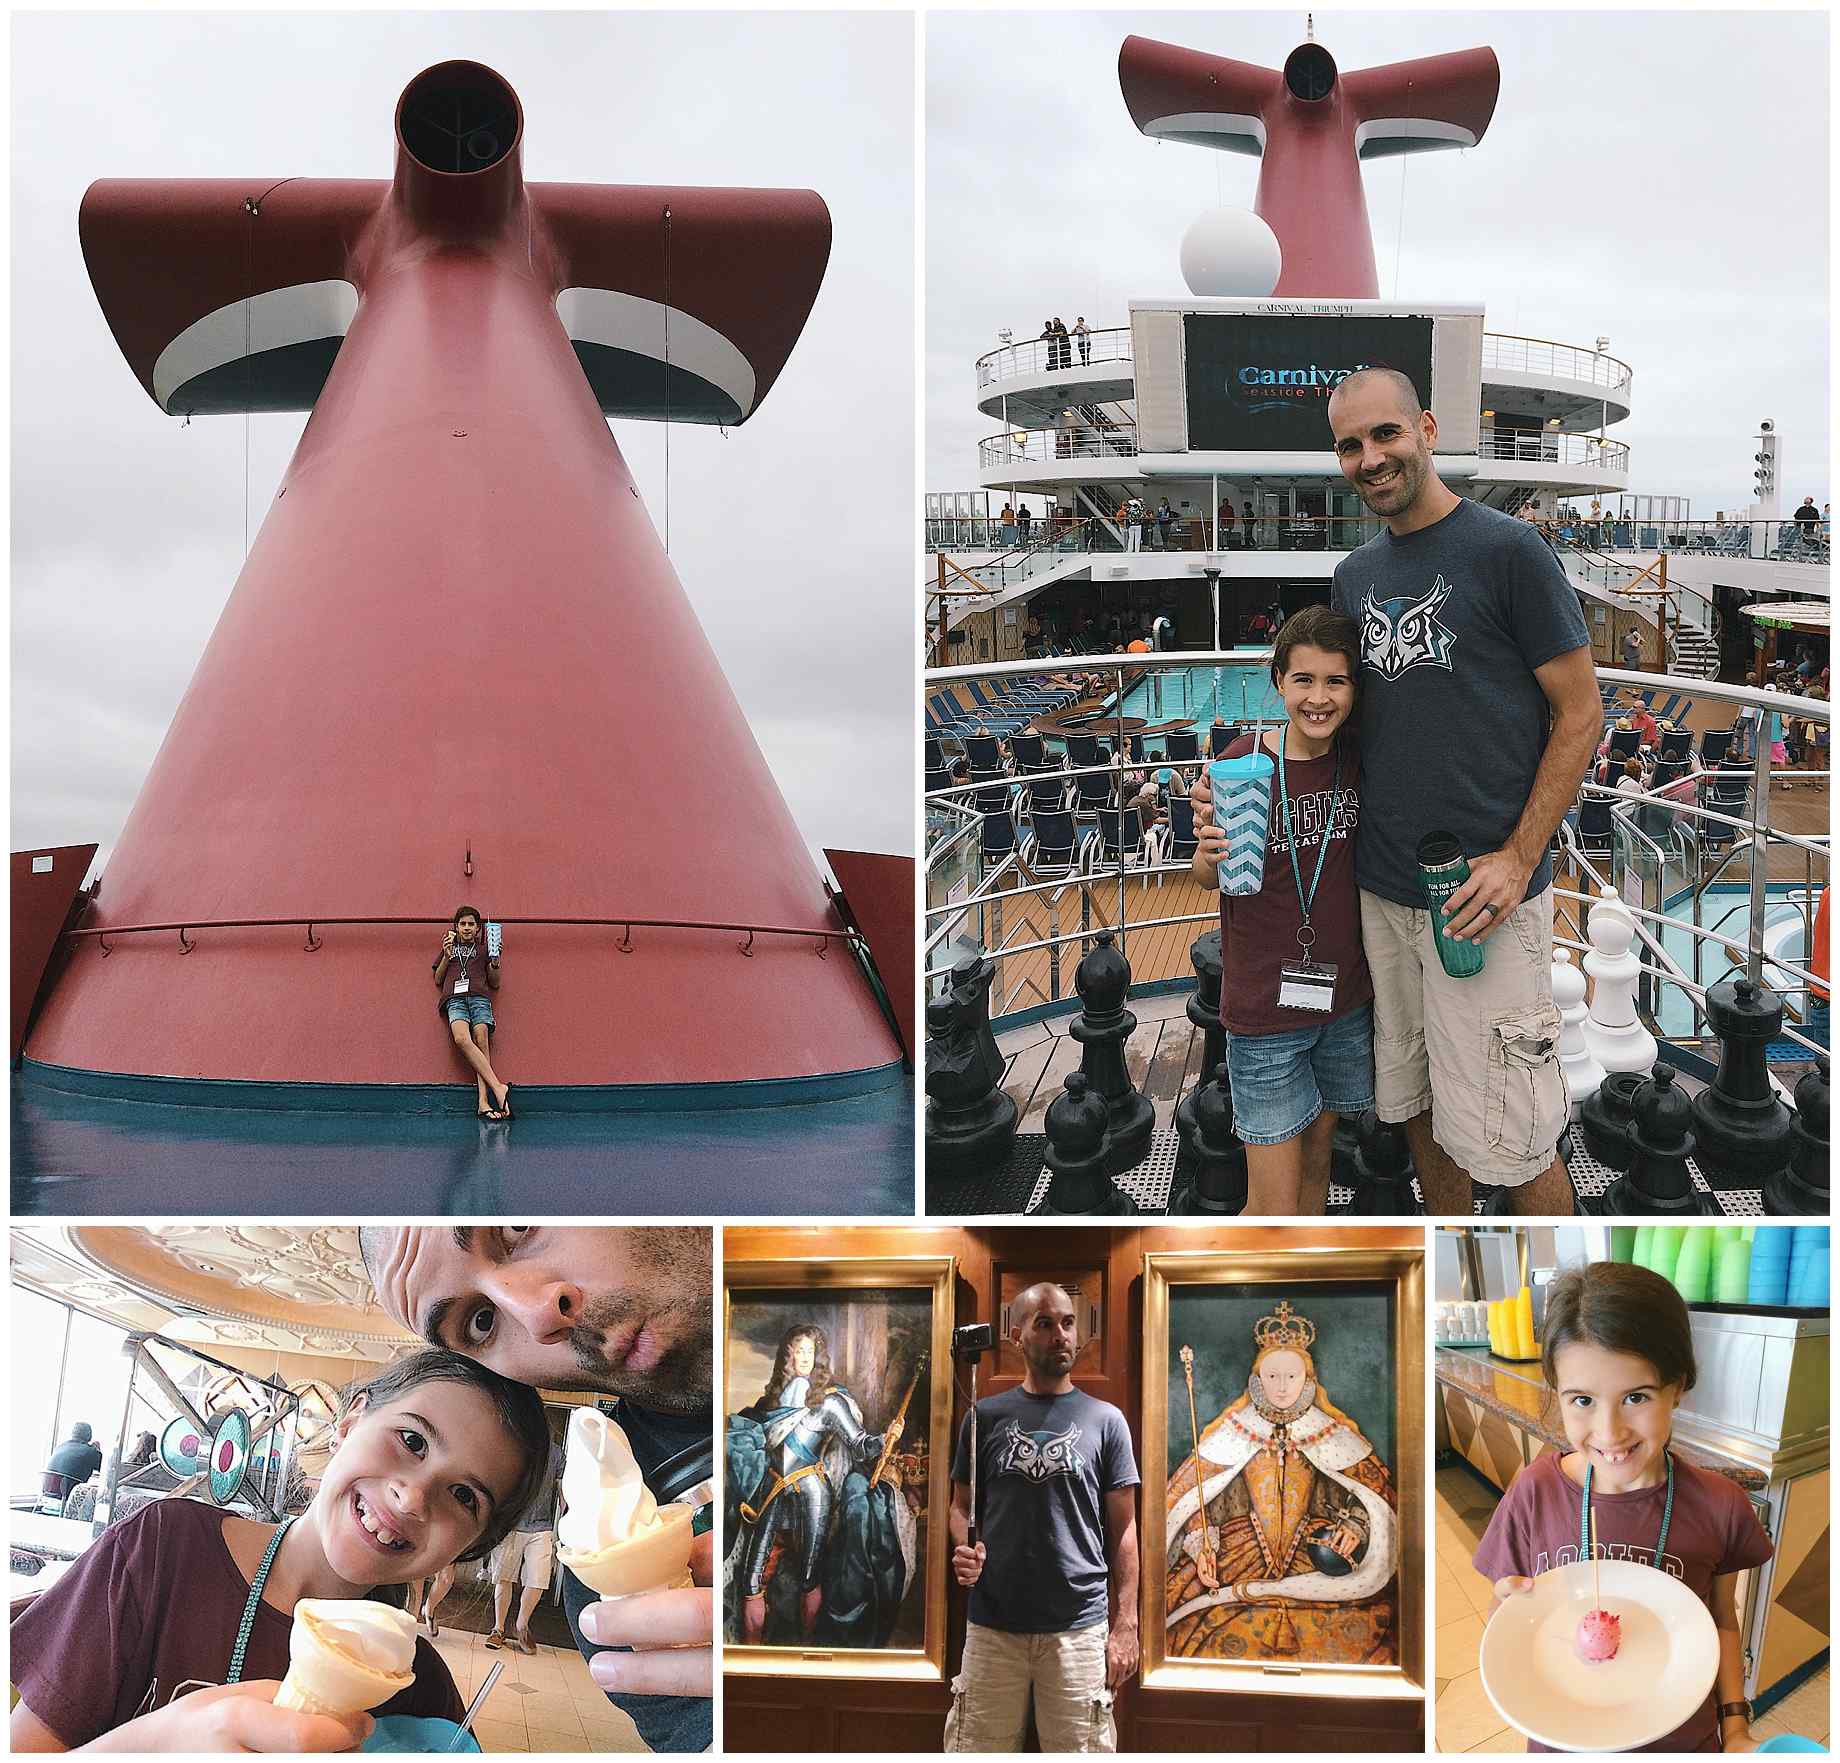 father-daughter-carnival-cruise-00003